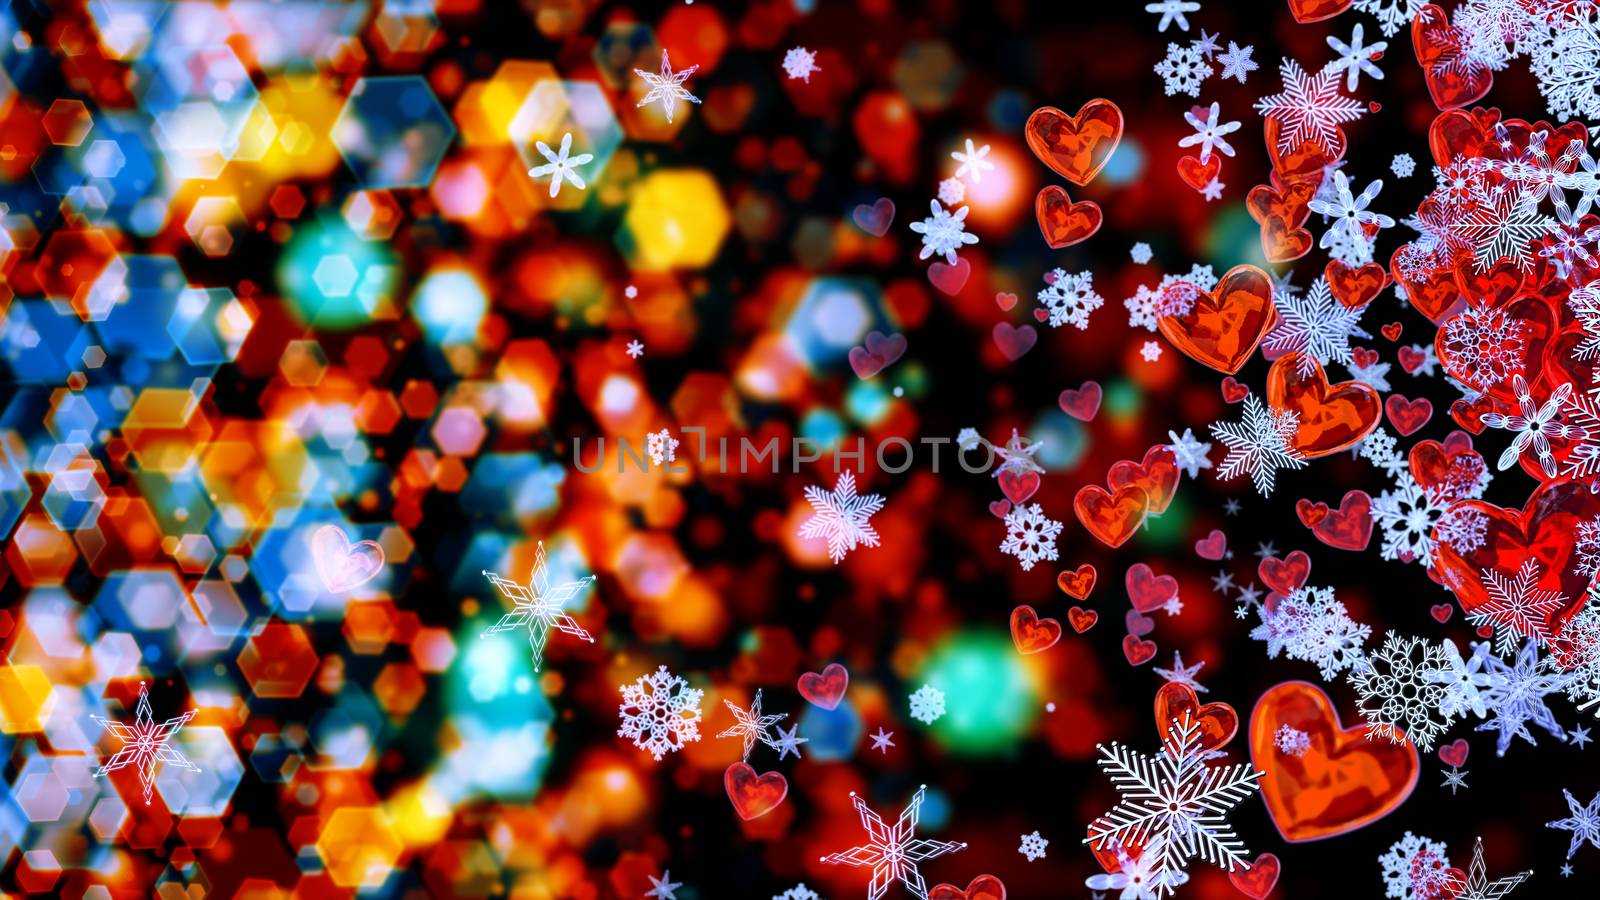 hearts and snowflakes as a symbol of romantic love by merzavka